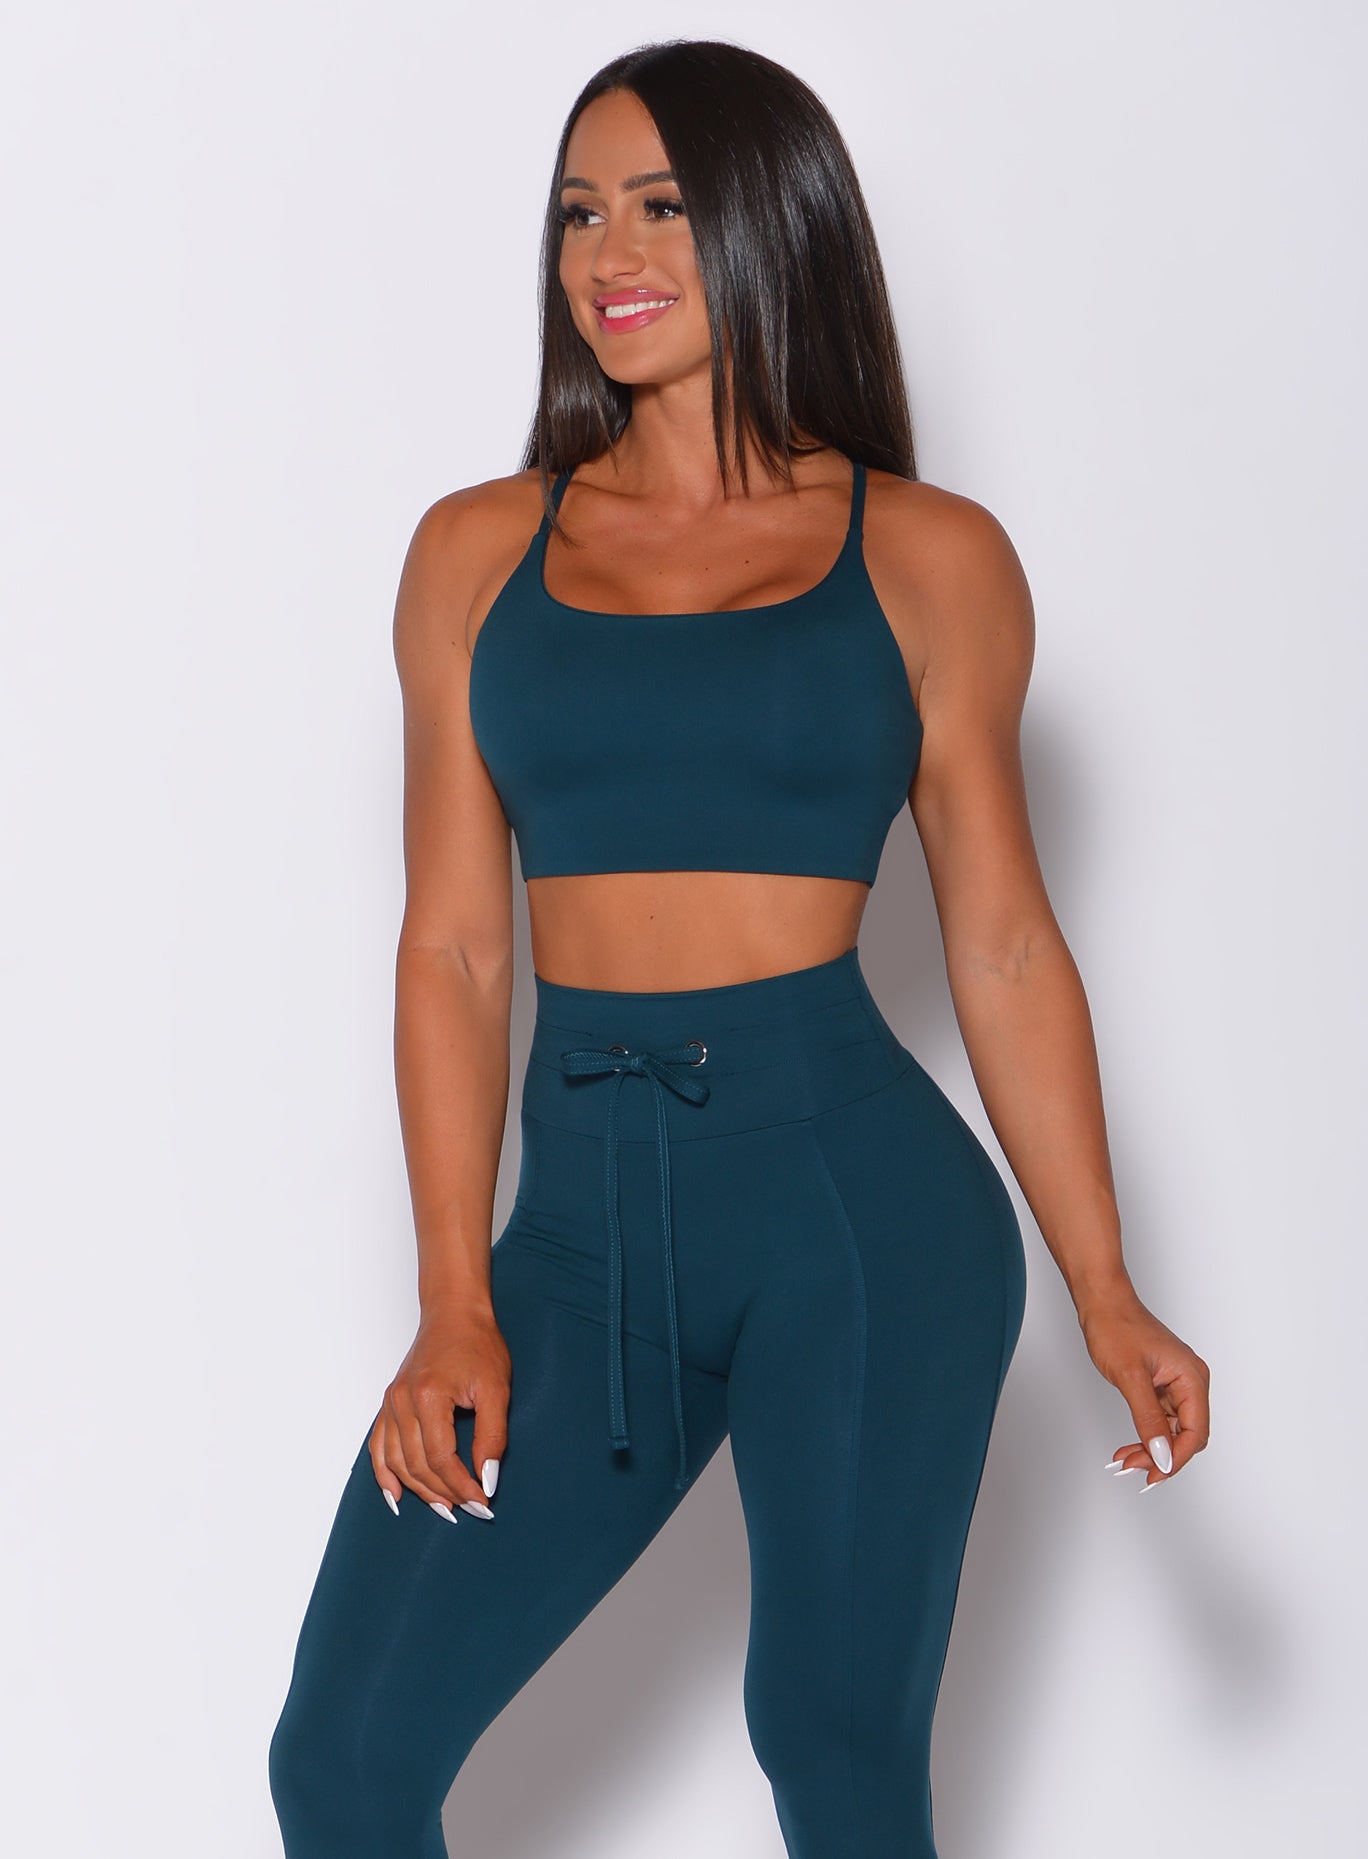 Front profile view of a model in our cross fit sports bra in peacock color and a matching leggings